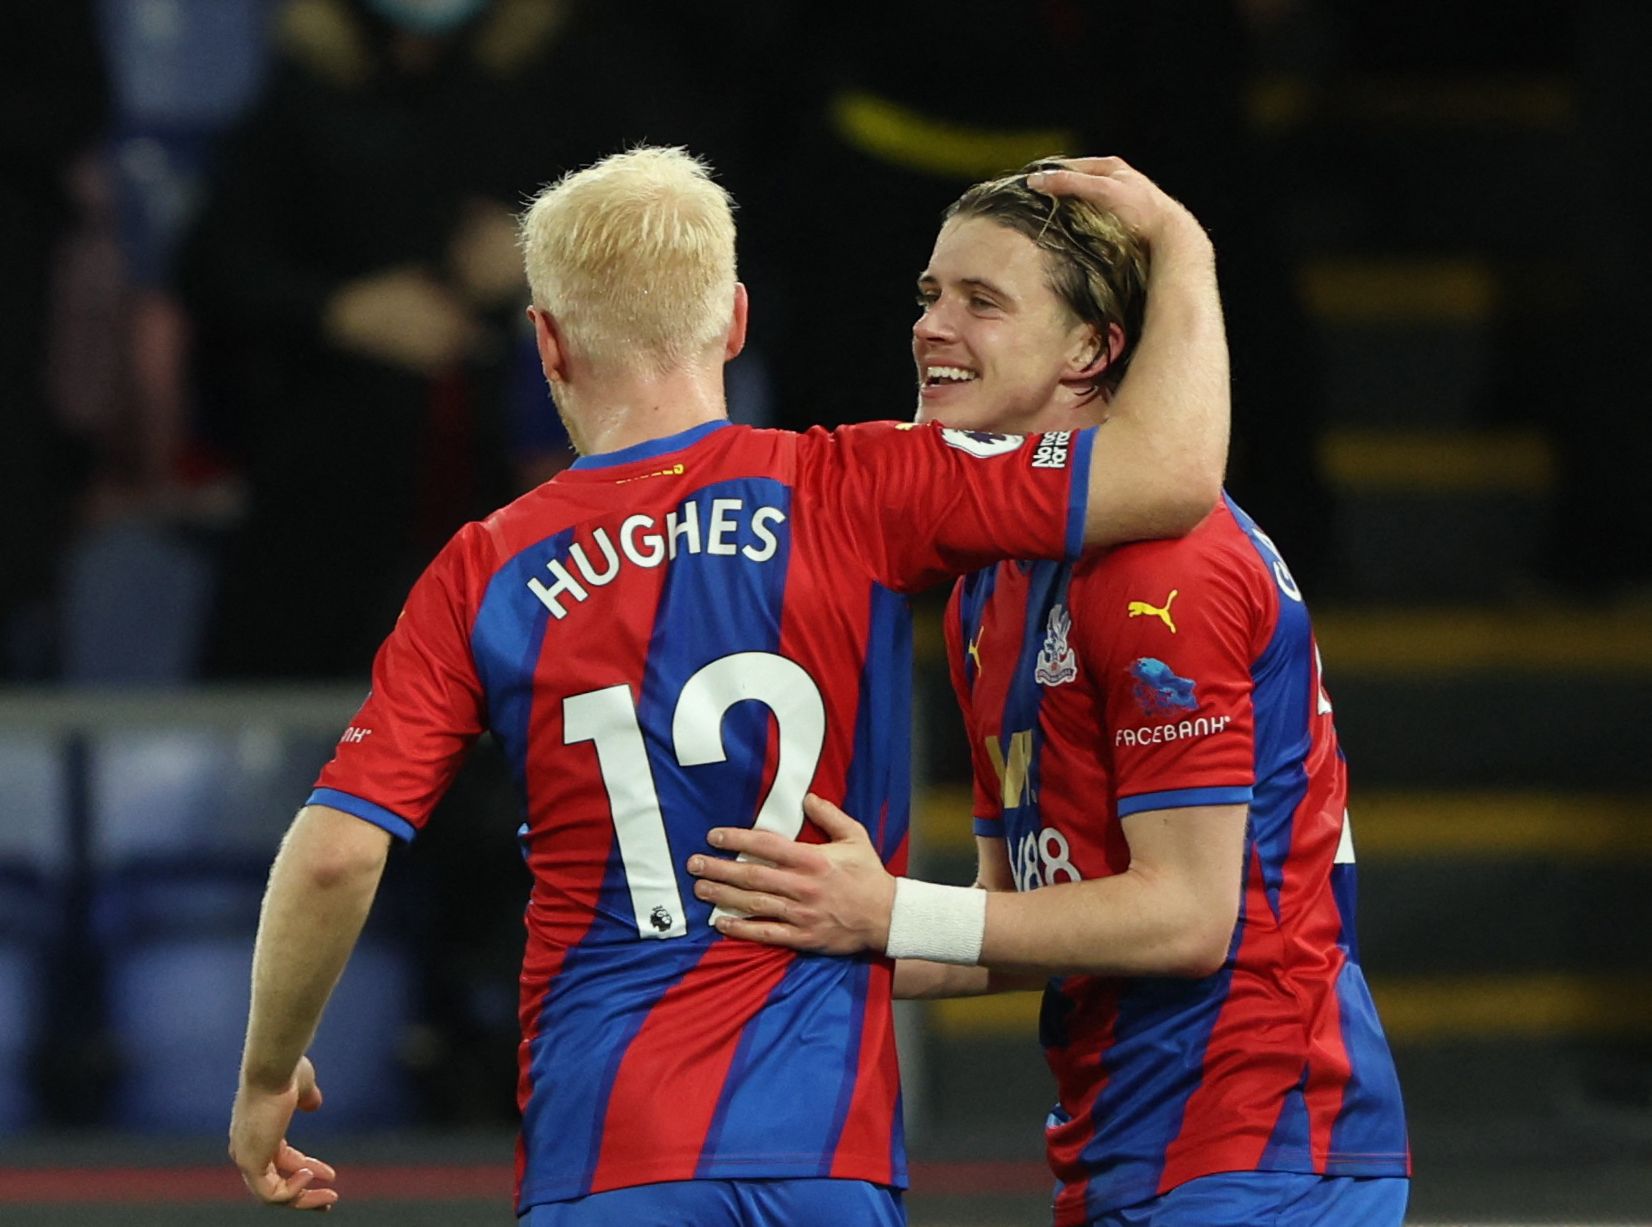 Premier League, Crystal Palace, Will Hughes, CPFC, CPFC news, CPFC vs MCFC, Selhurst Park